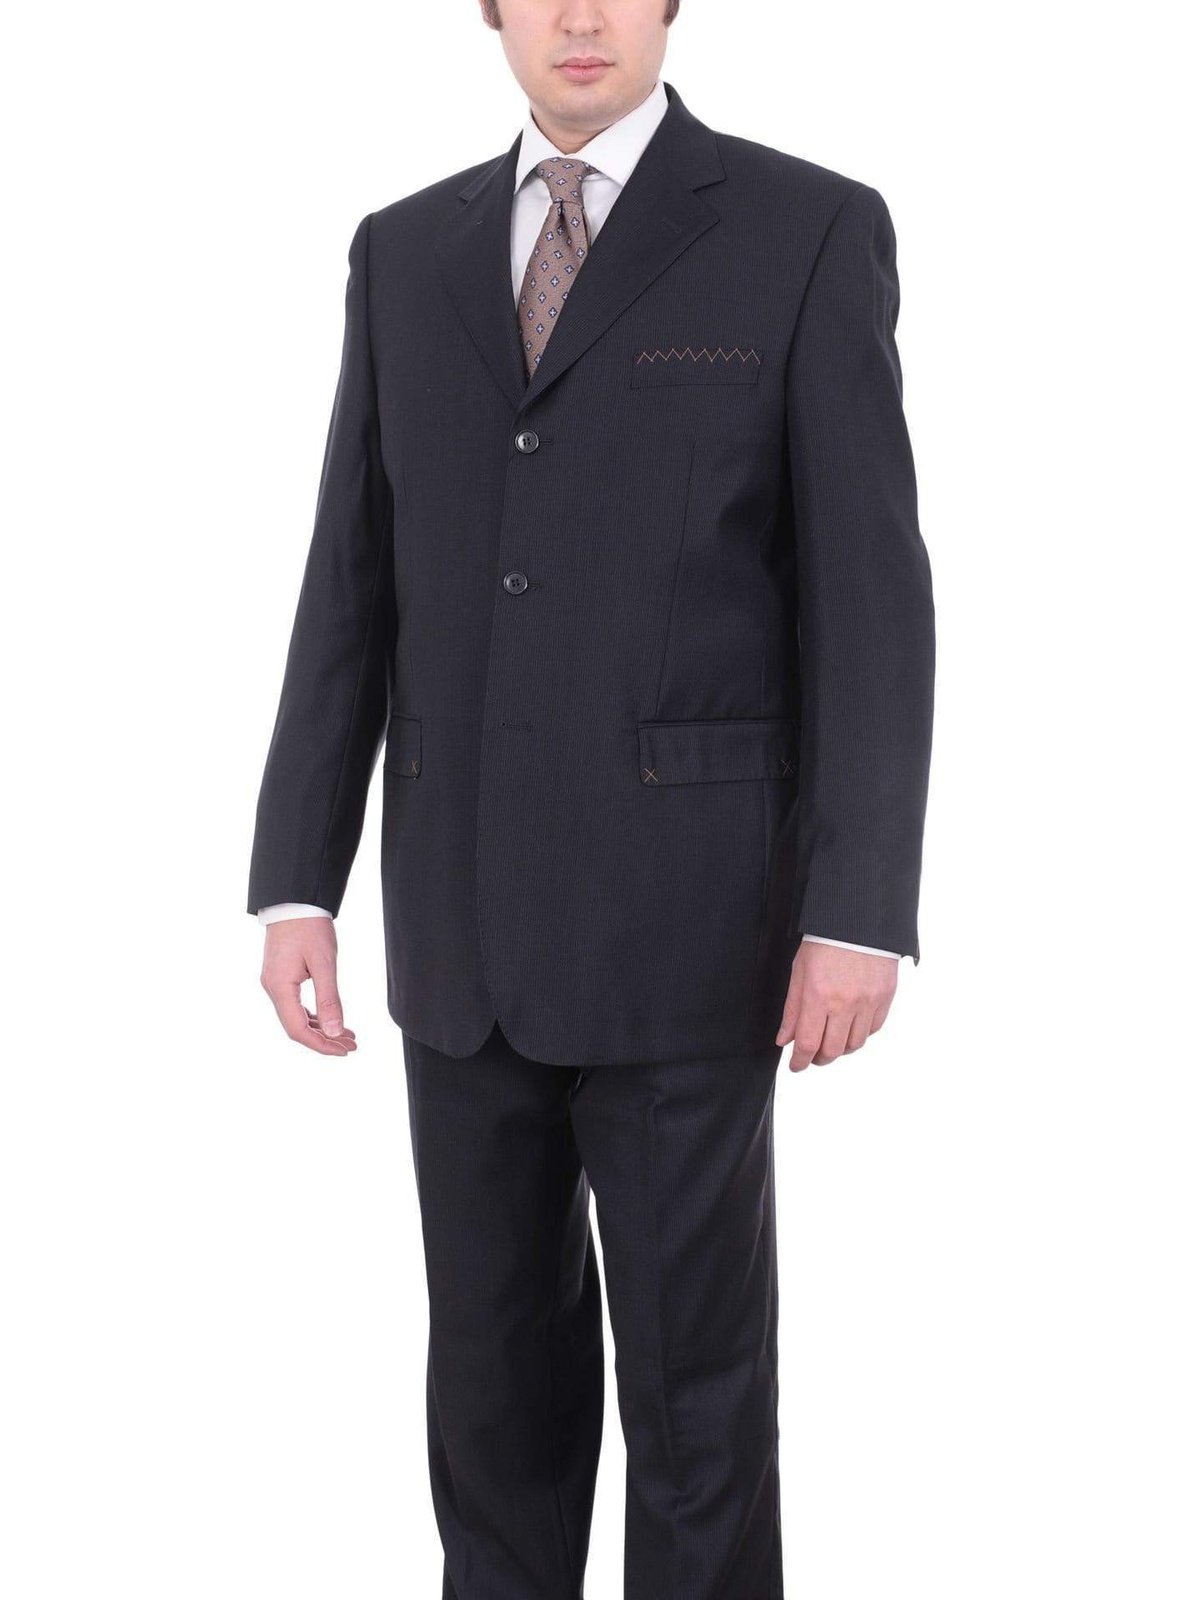 Carlo Palazzi Sale Suits 40S Mens Italy Classic Fit Navy Blue 3 Button Pleated 100% Wool Suit